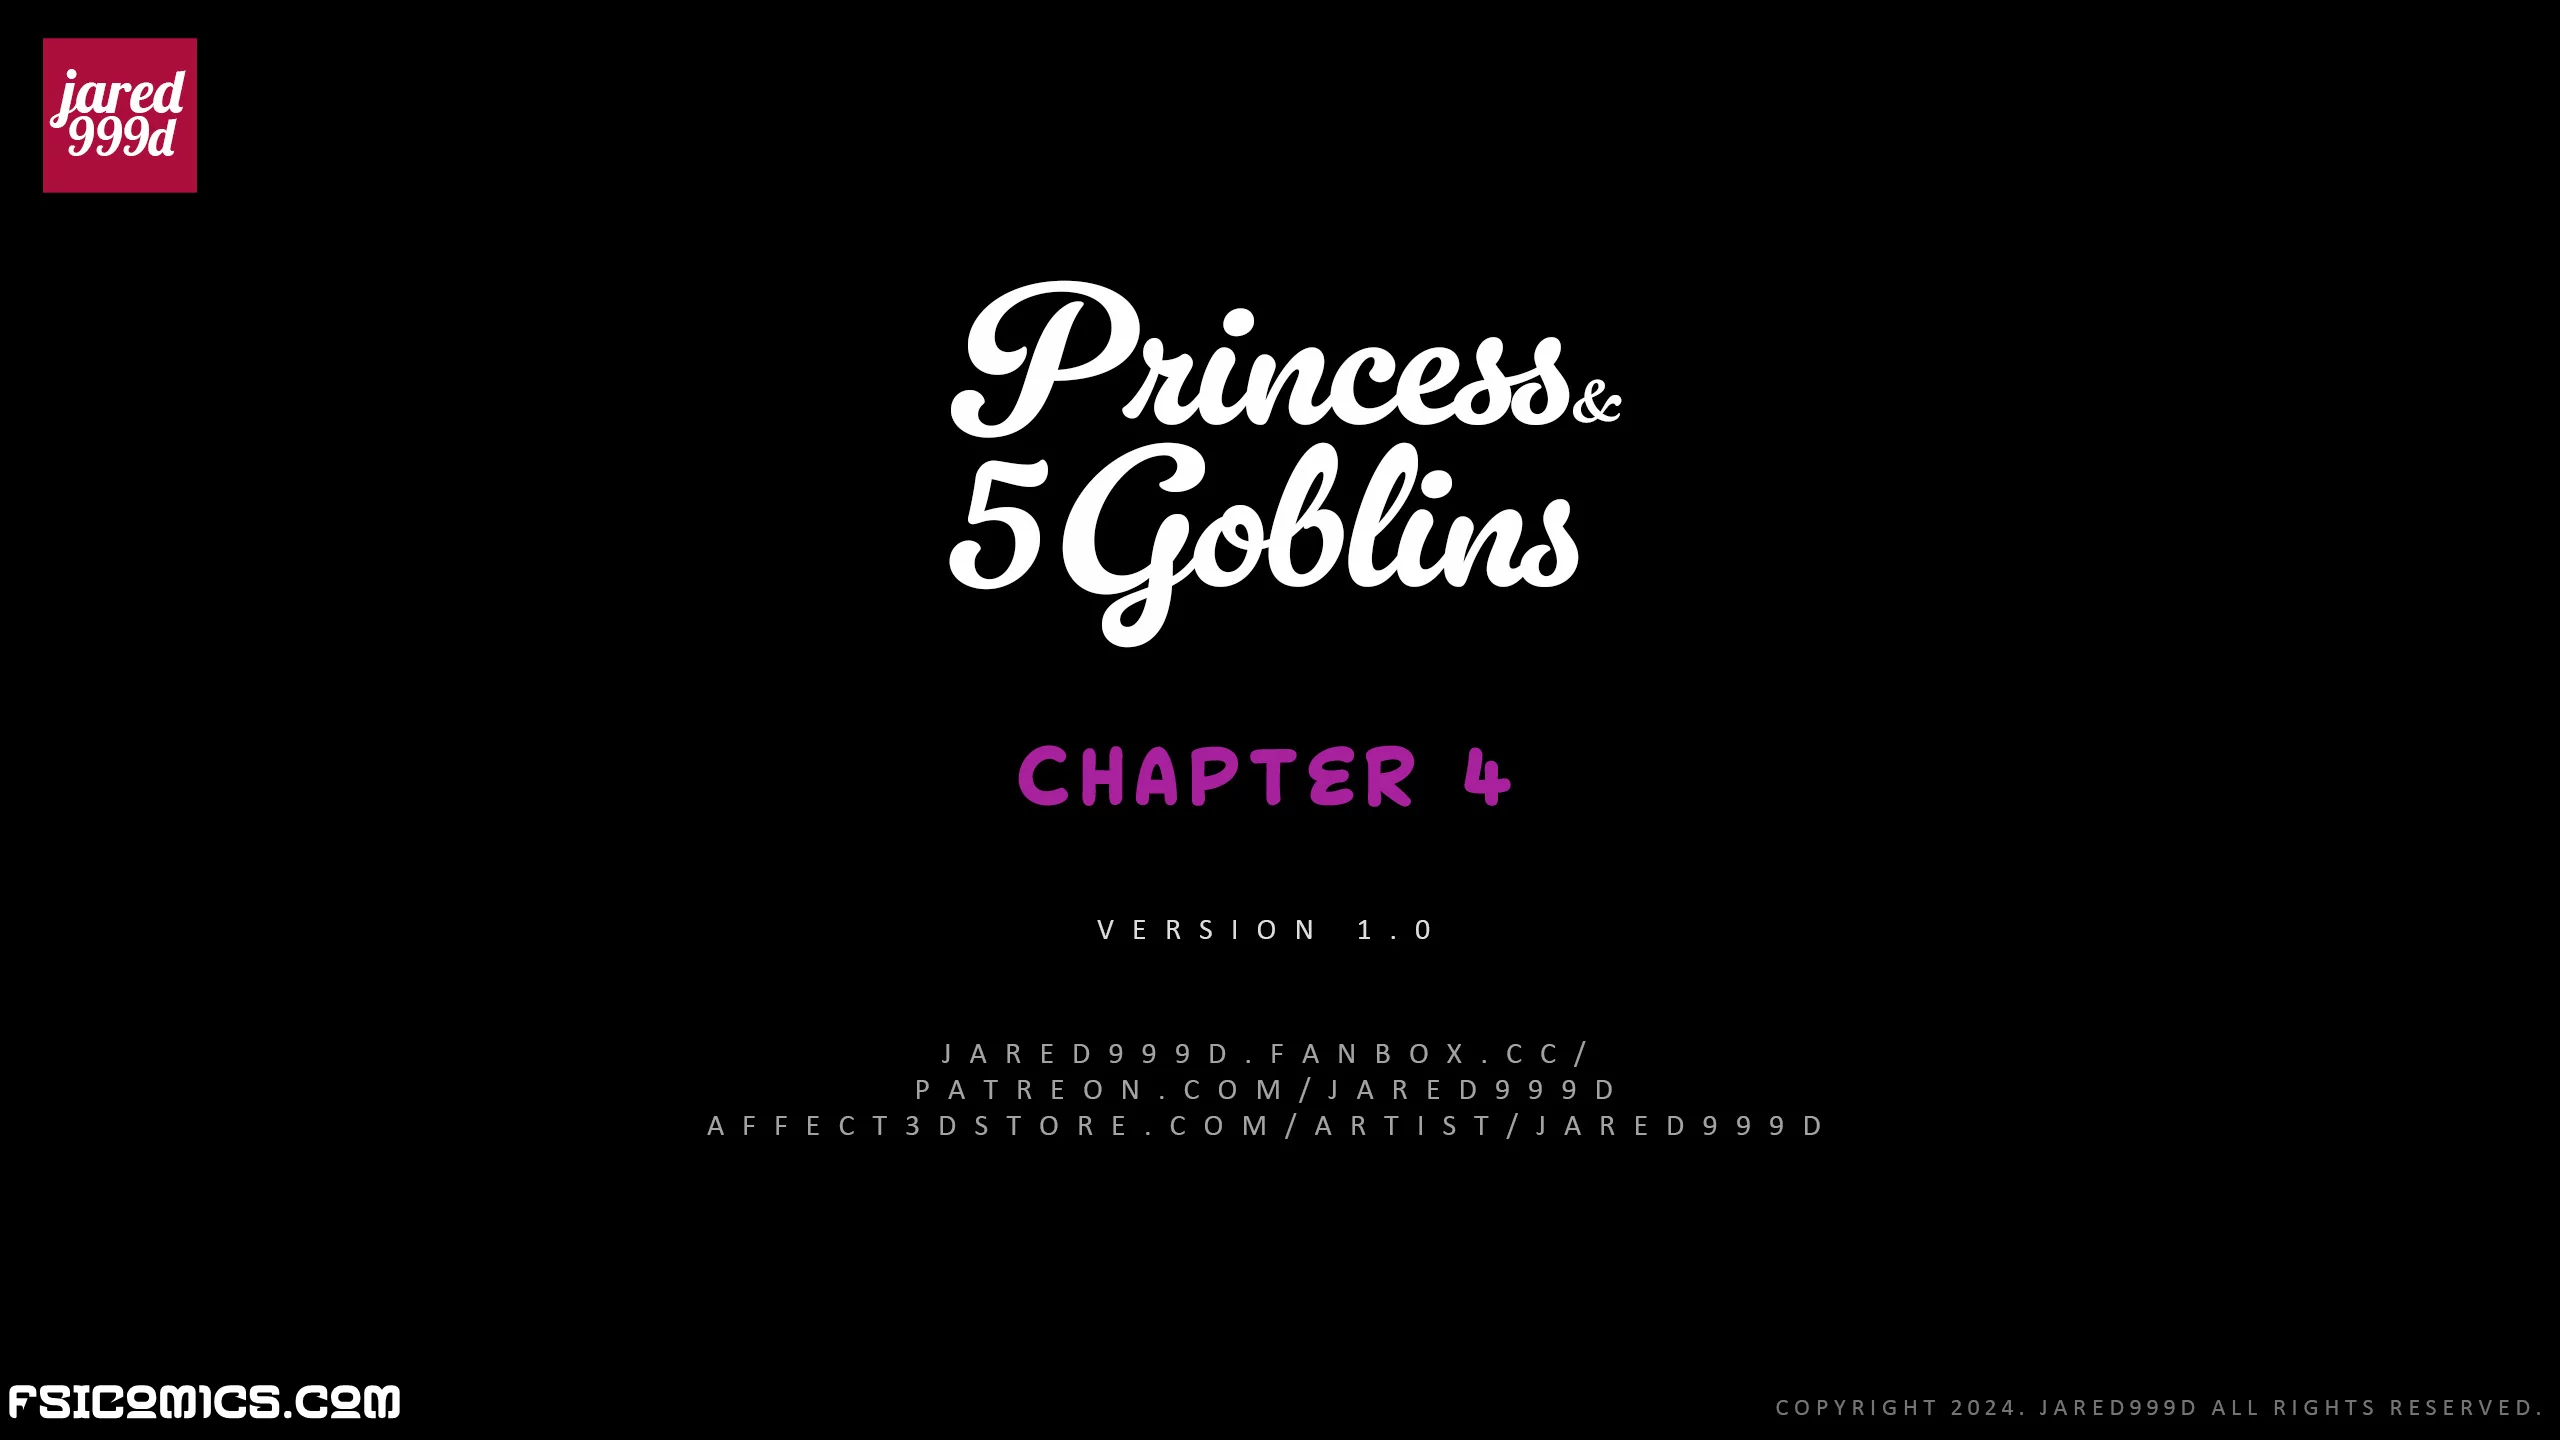 Princess And 5 Goblins Chapter 4 - Jared999D - 573 - FSIComics